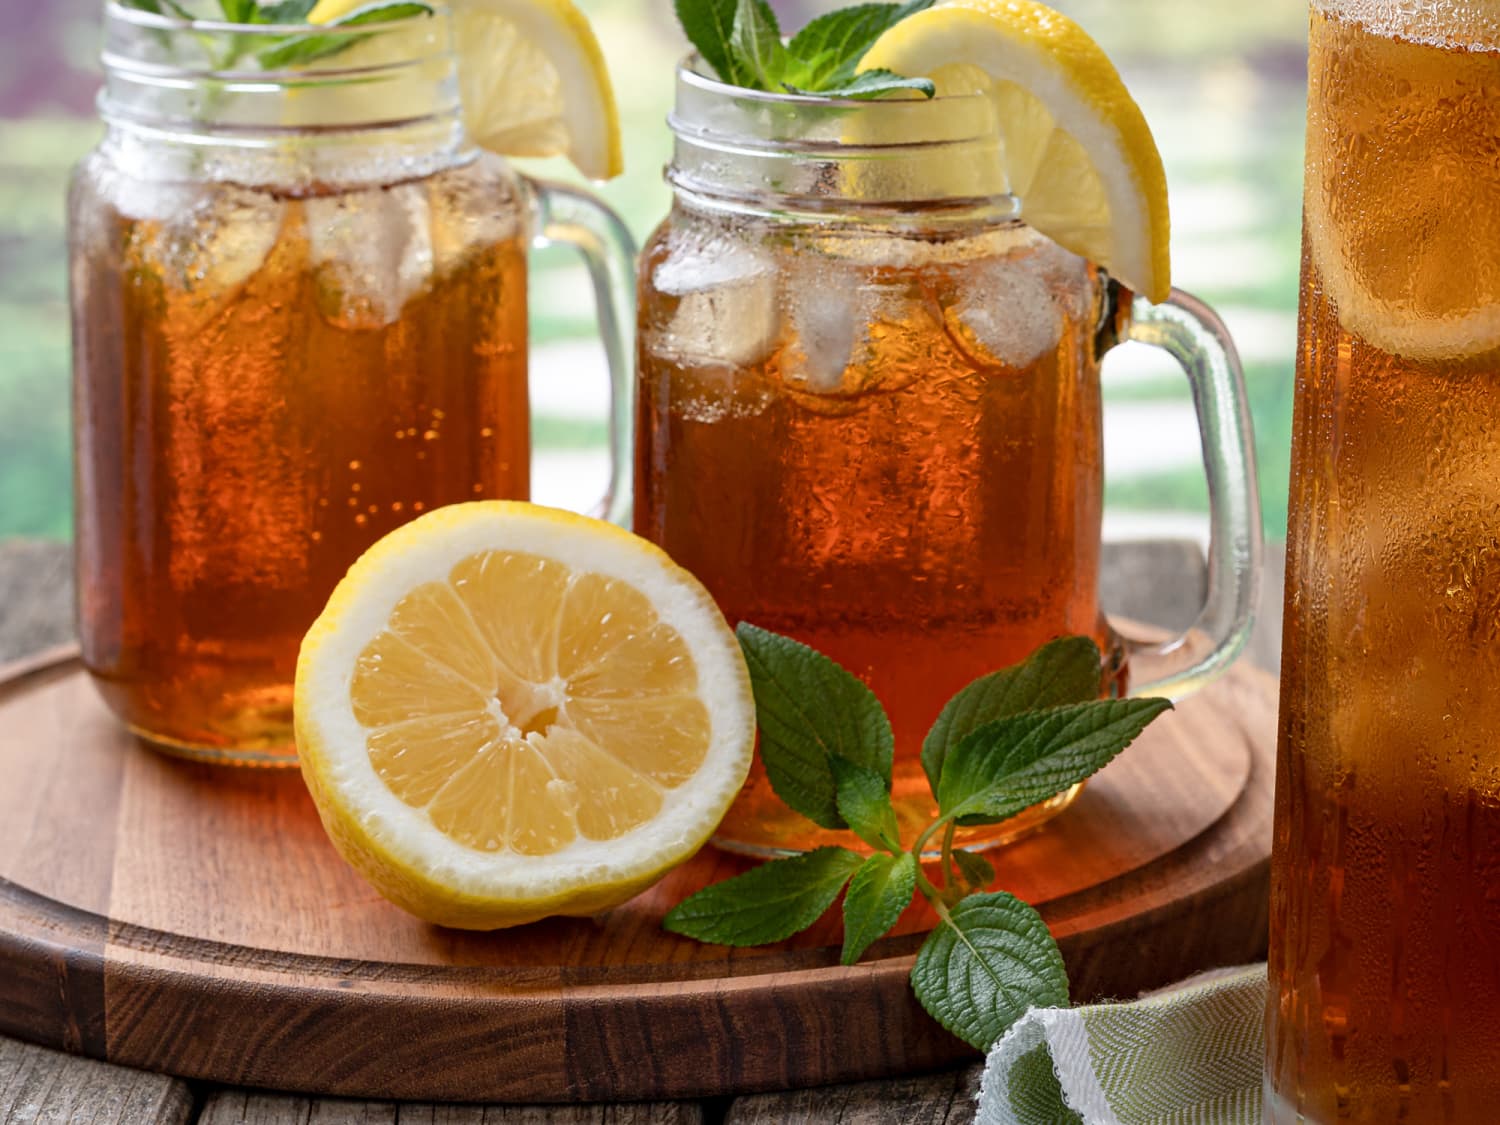 The Best Loose Leaf Iced Tea Makers for Your Summer Sipping – Plum